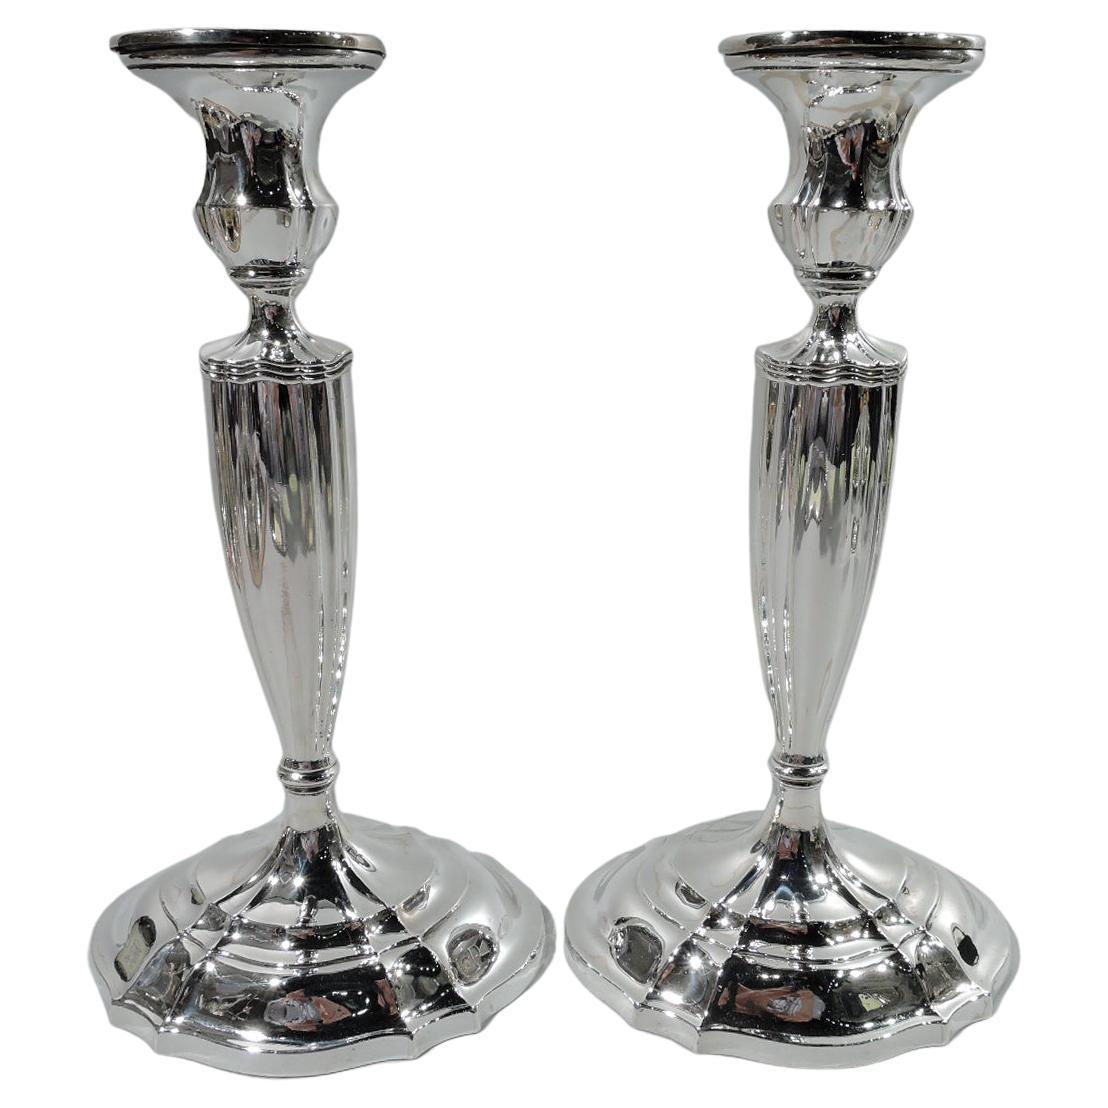 Pair of American Edwardian Sterling Silver Candlesticks by Gorham For Sale